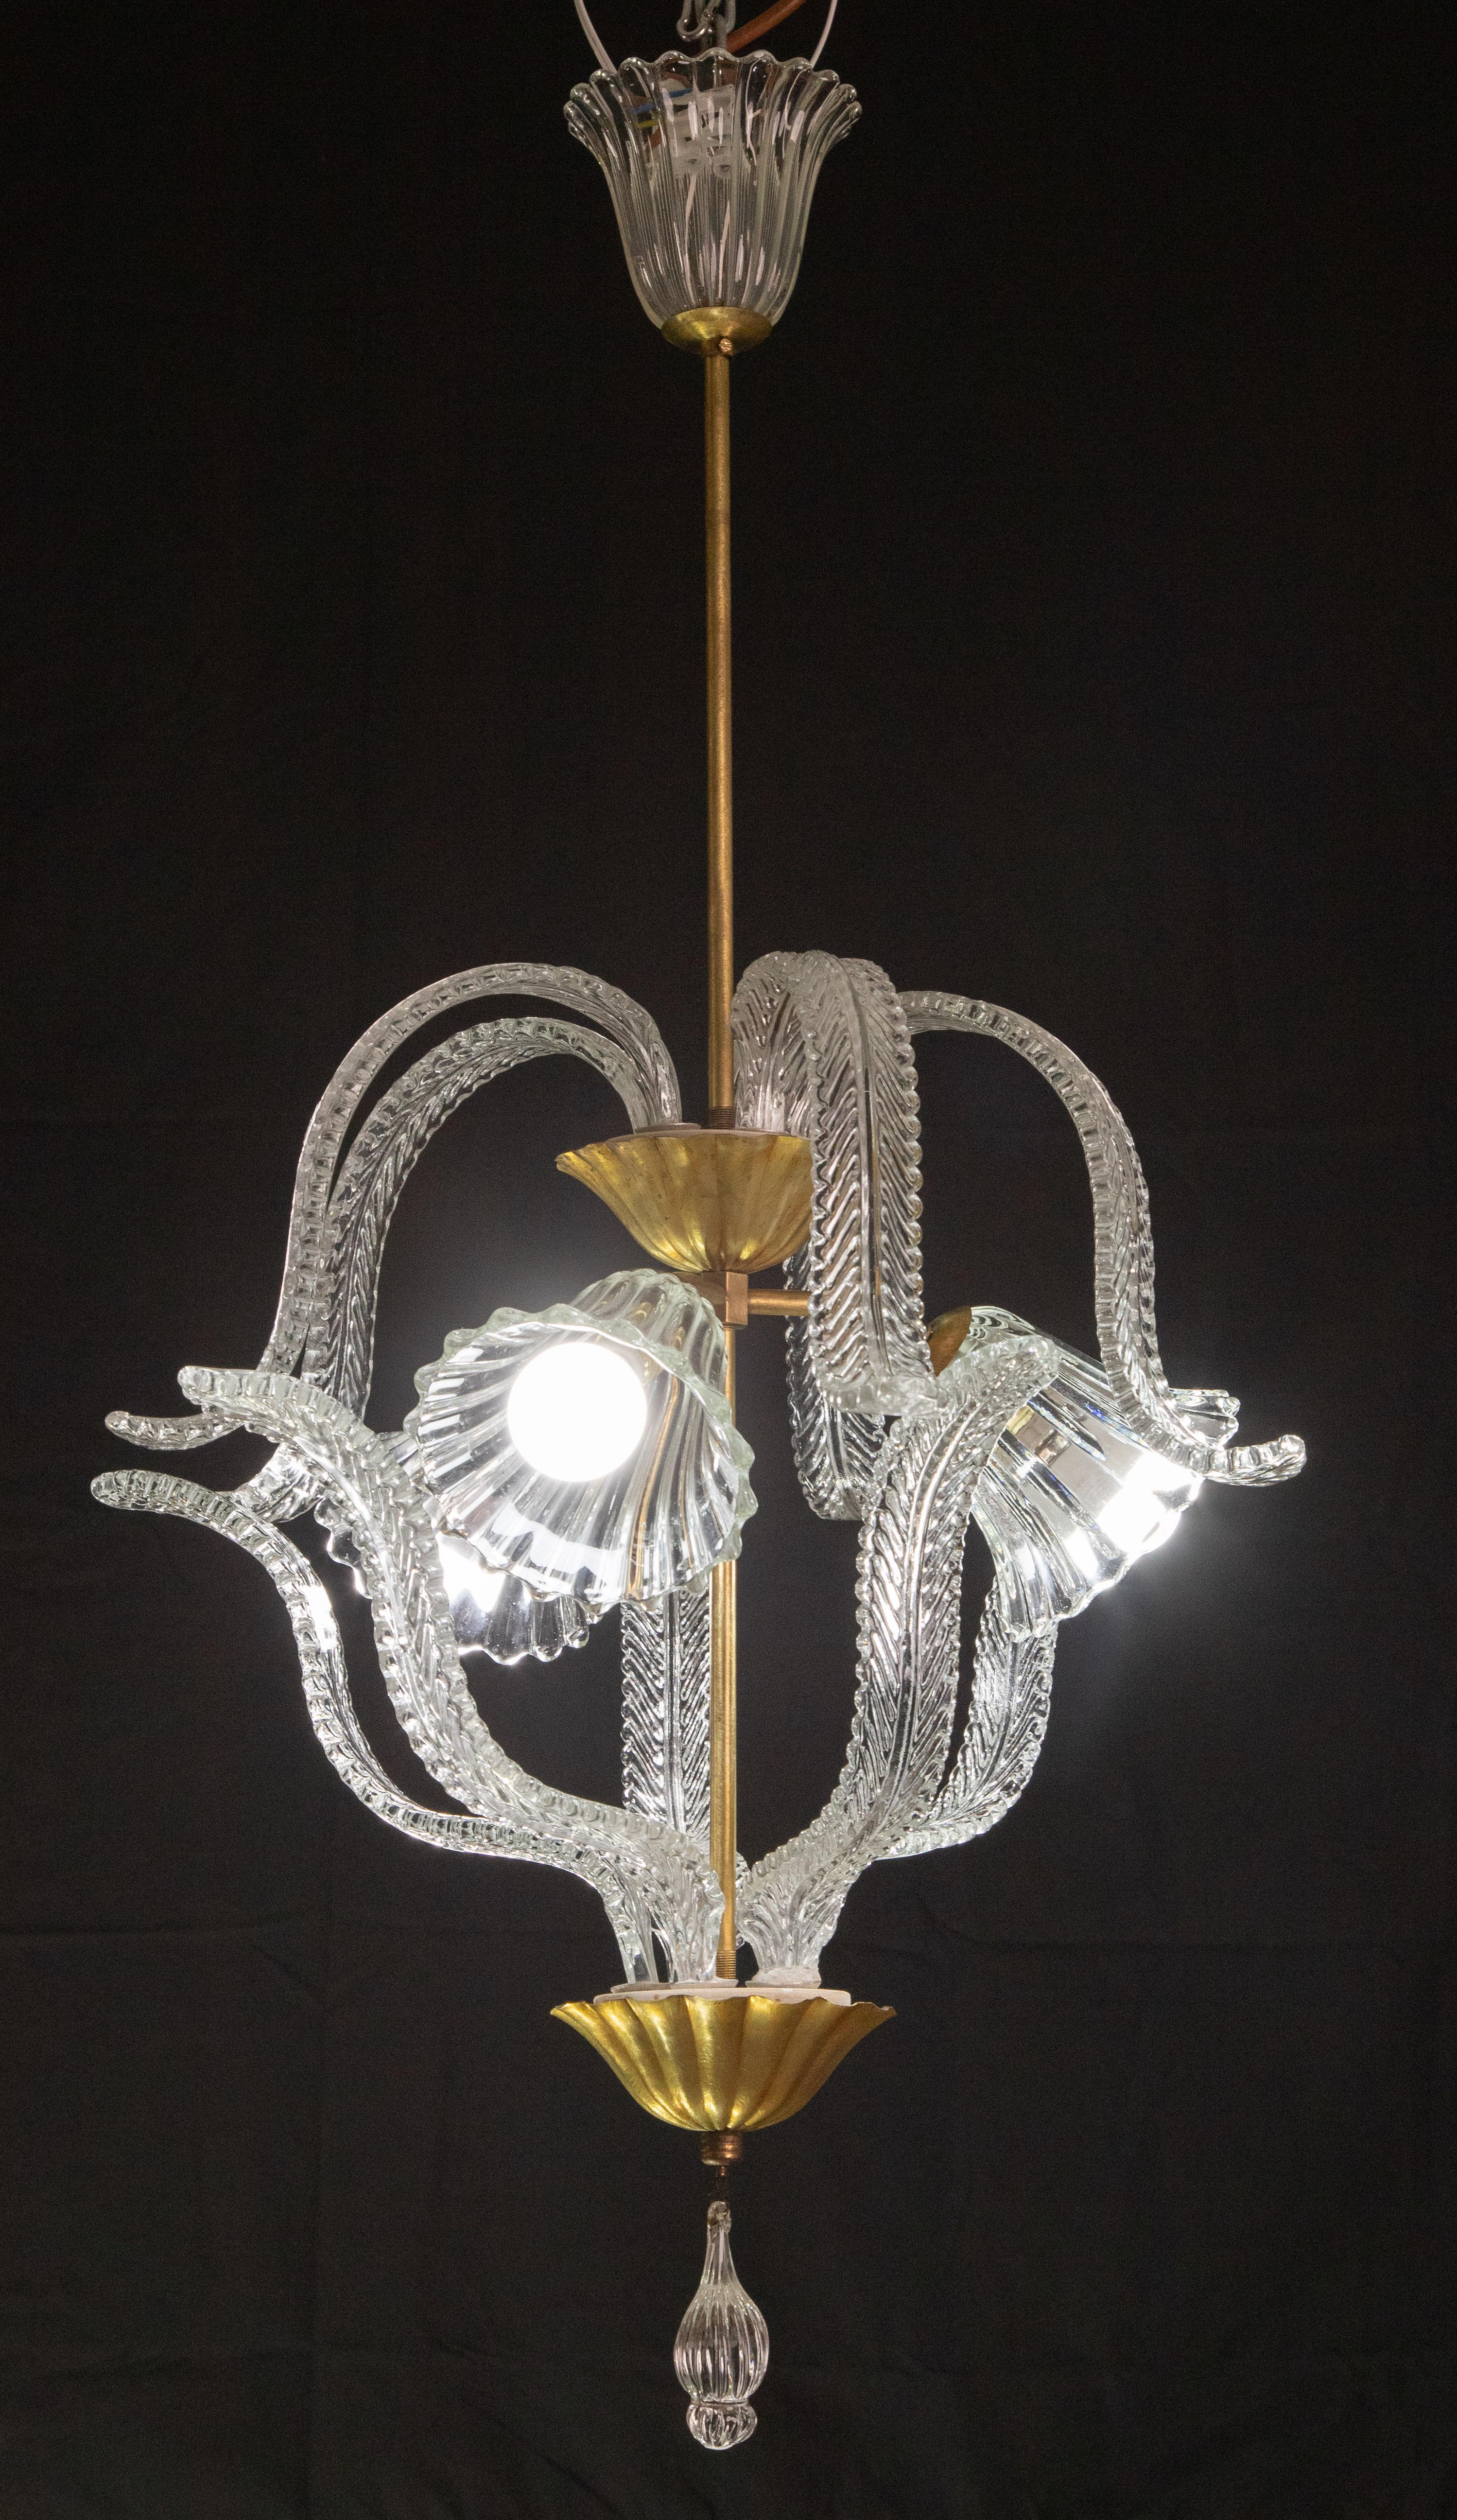 Splendid Art Deco chandelier attribuited to Ercole Barovier made by the glassworks Barovier & Toso in the 1940s-1950s.
The chandelier is 90 cm high and measures 60 cm wide.
The glass elements make this tree-cup pendant extremely unique.
All the